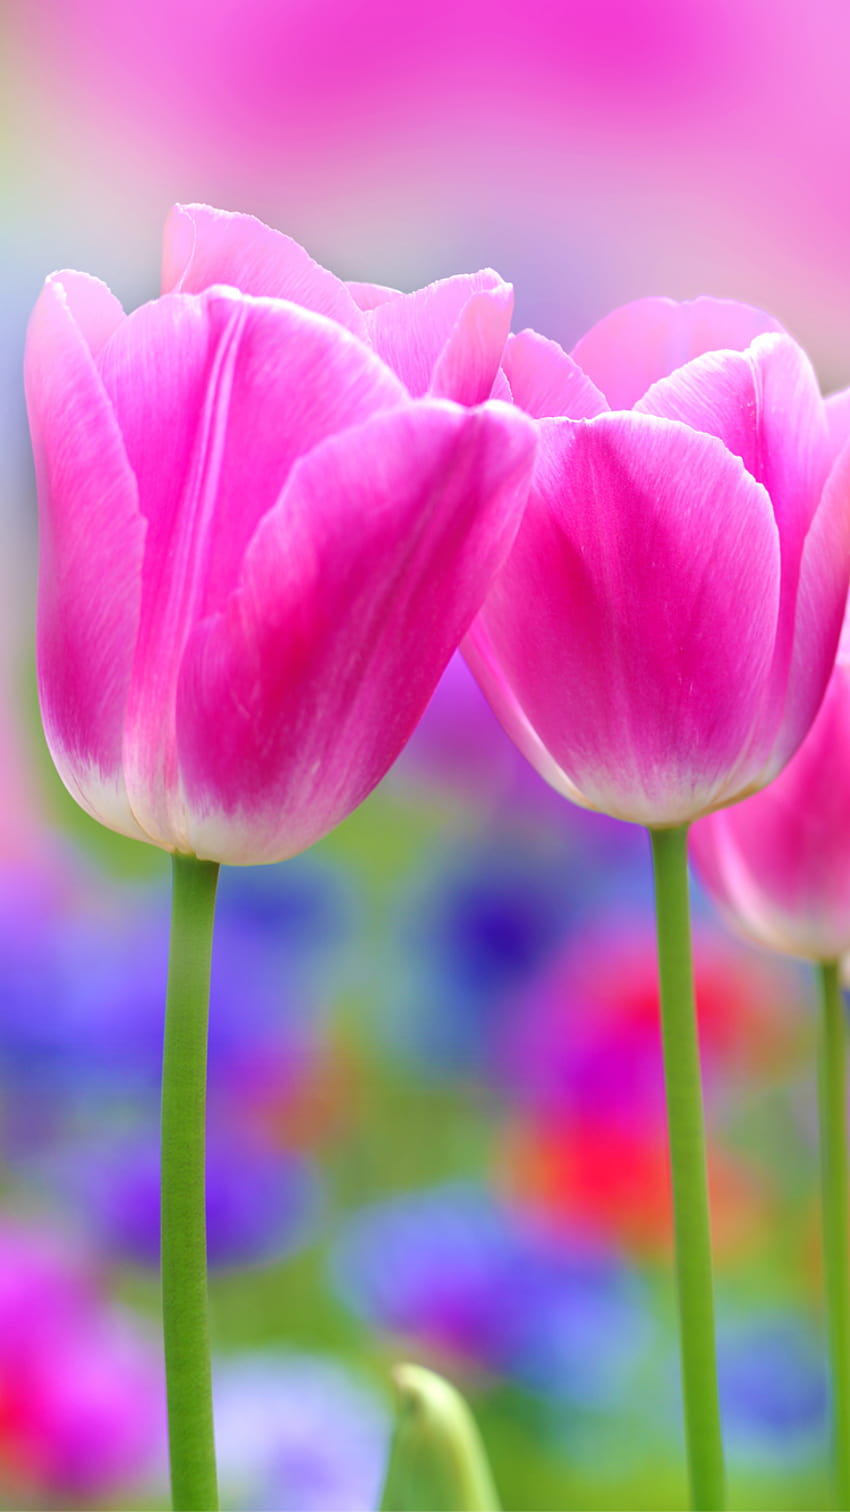 Apple iPhone 6s with Pink Tulips Flower, iphone 6 flower HD phone wallpaper